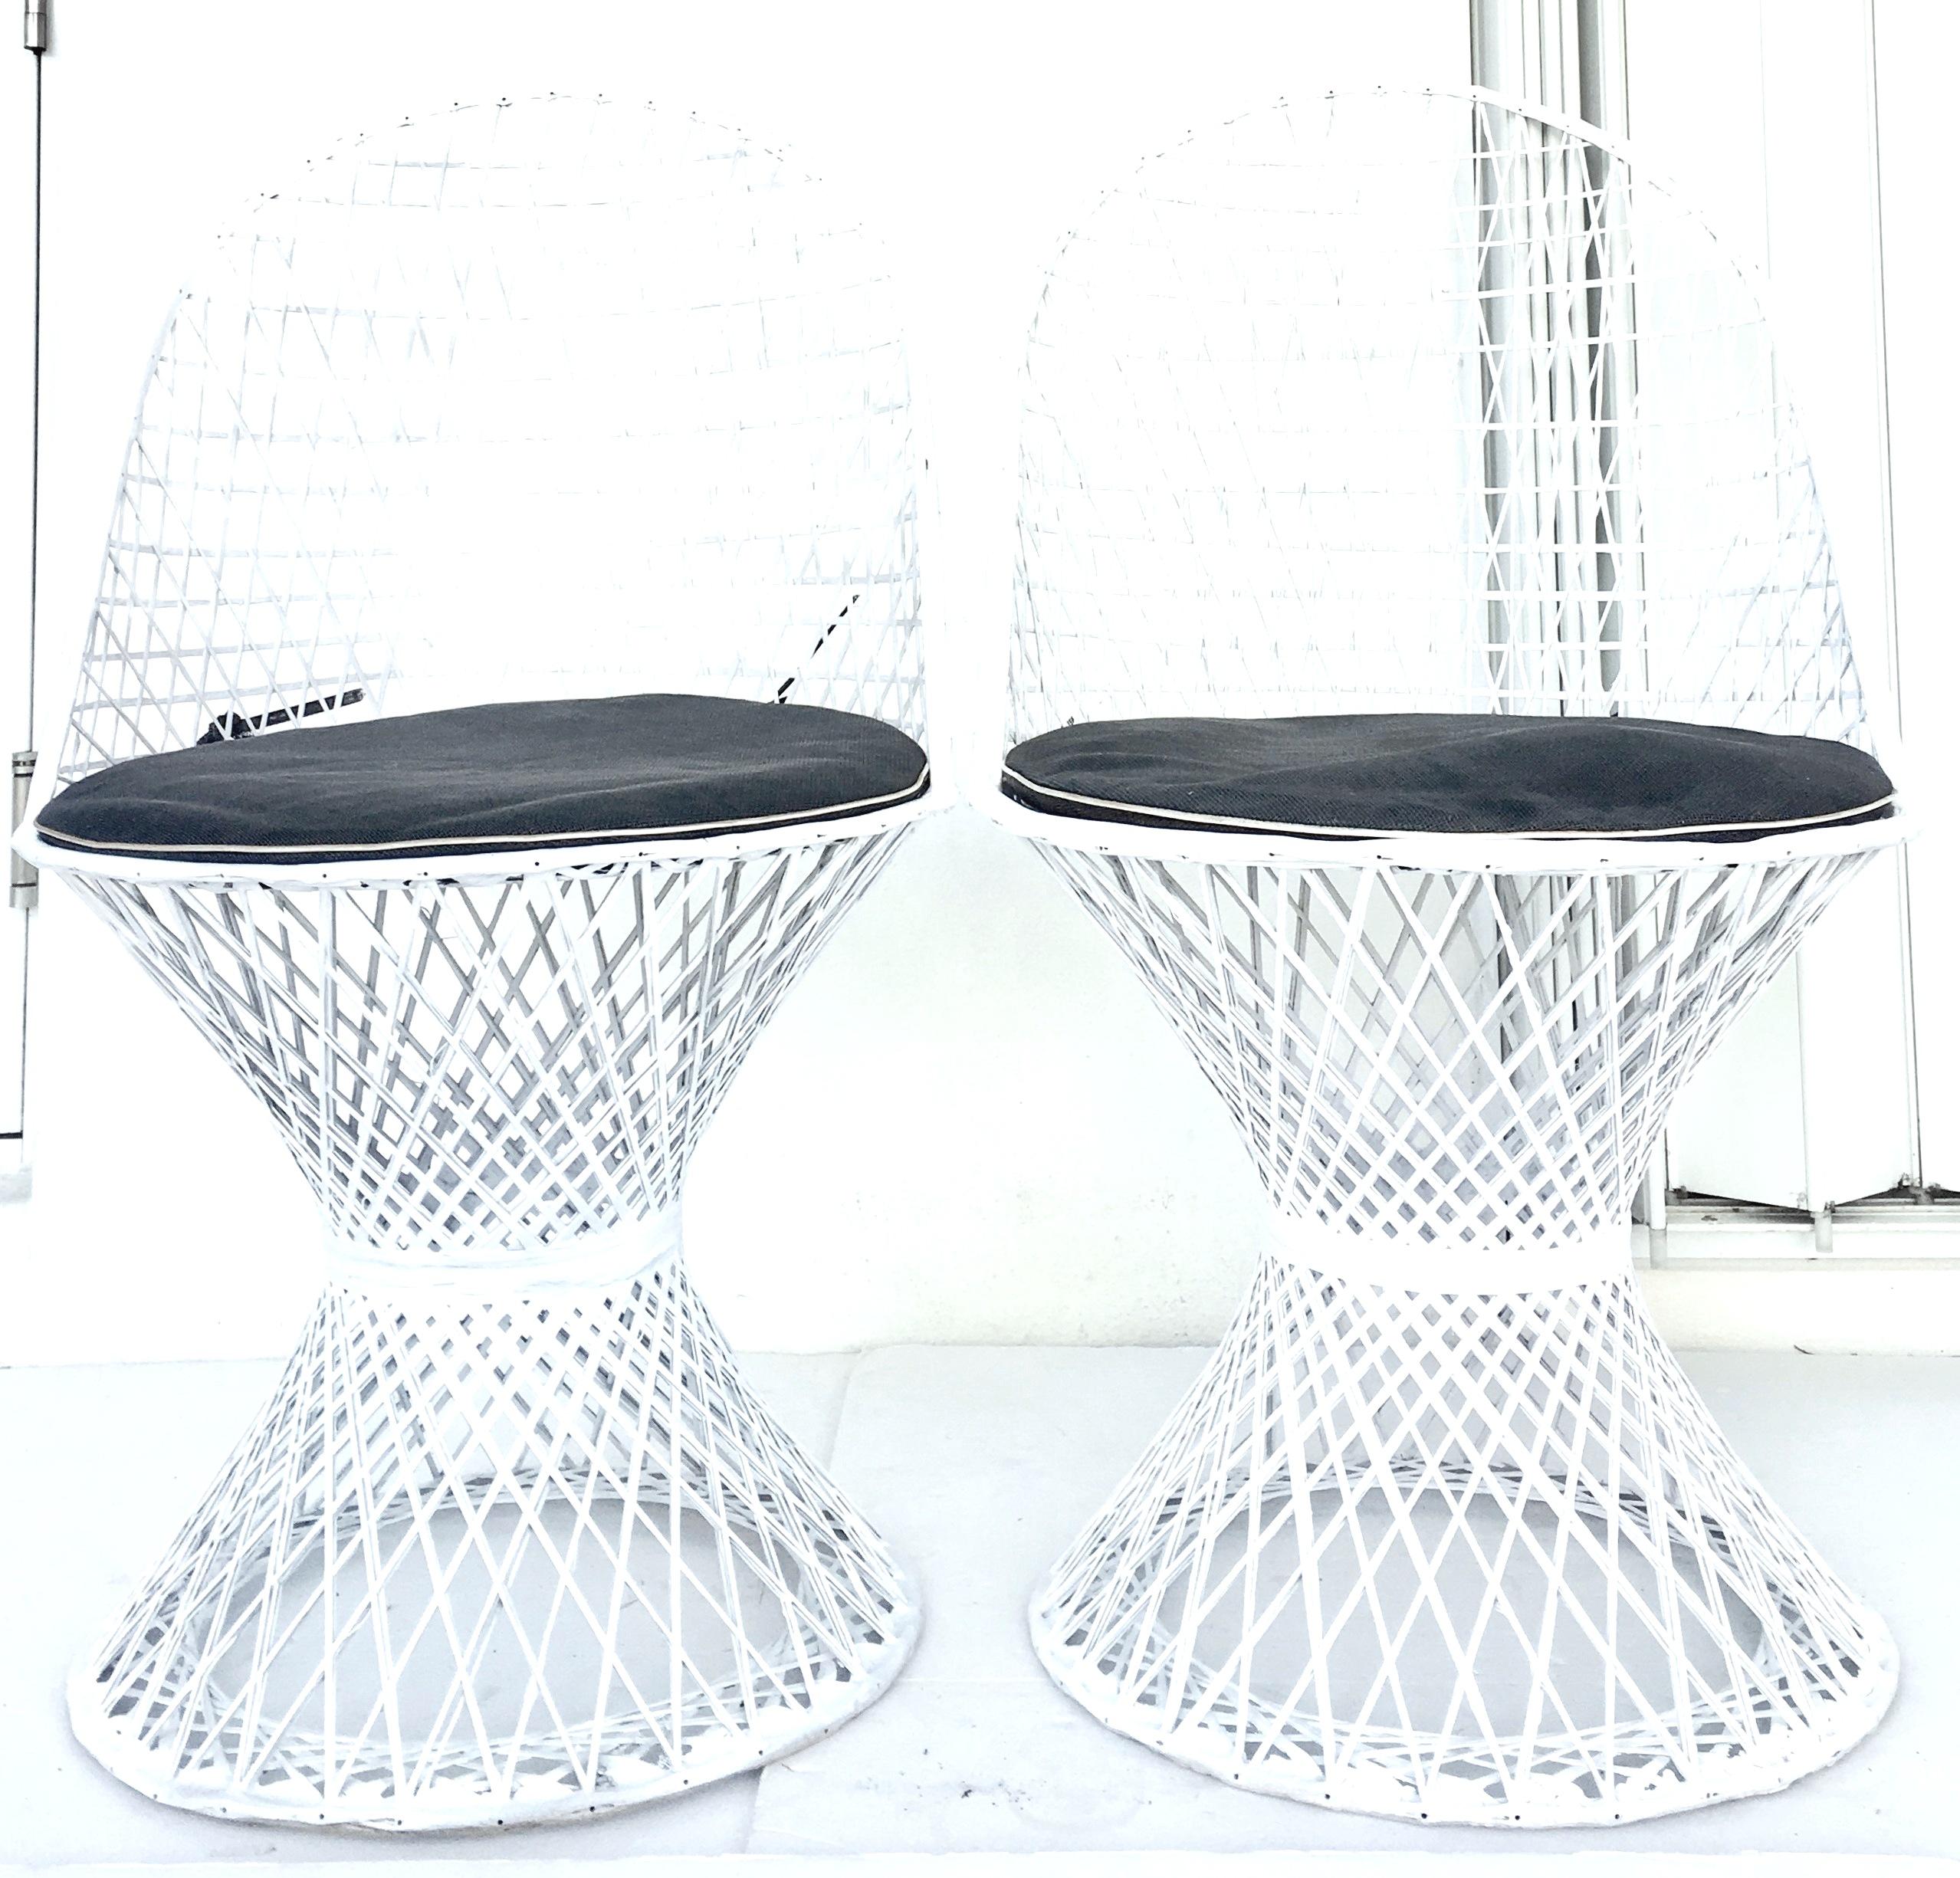 A Pair of spun fiberglass curve back chairs by Russell Woodard. Newly painted in original white finish. Includes two original black vinyl cushion with white piping. Ideal for any space, indoor or outdoor, lightweight for easy movement.
Measures: